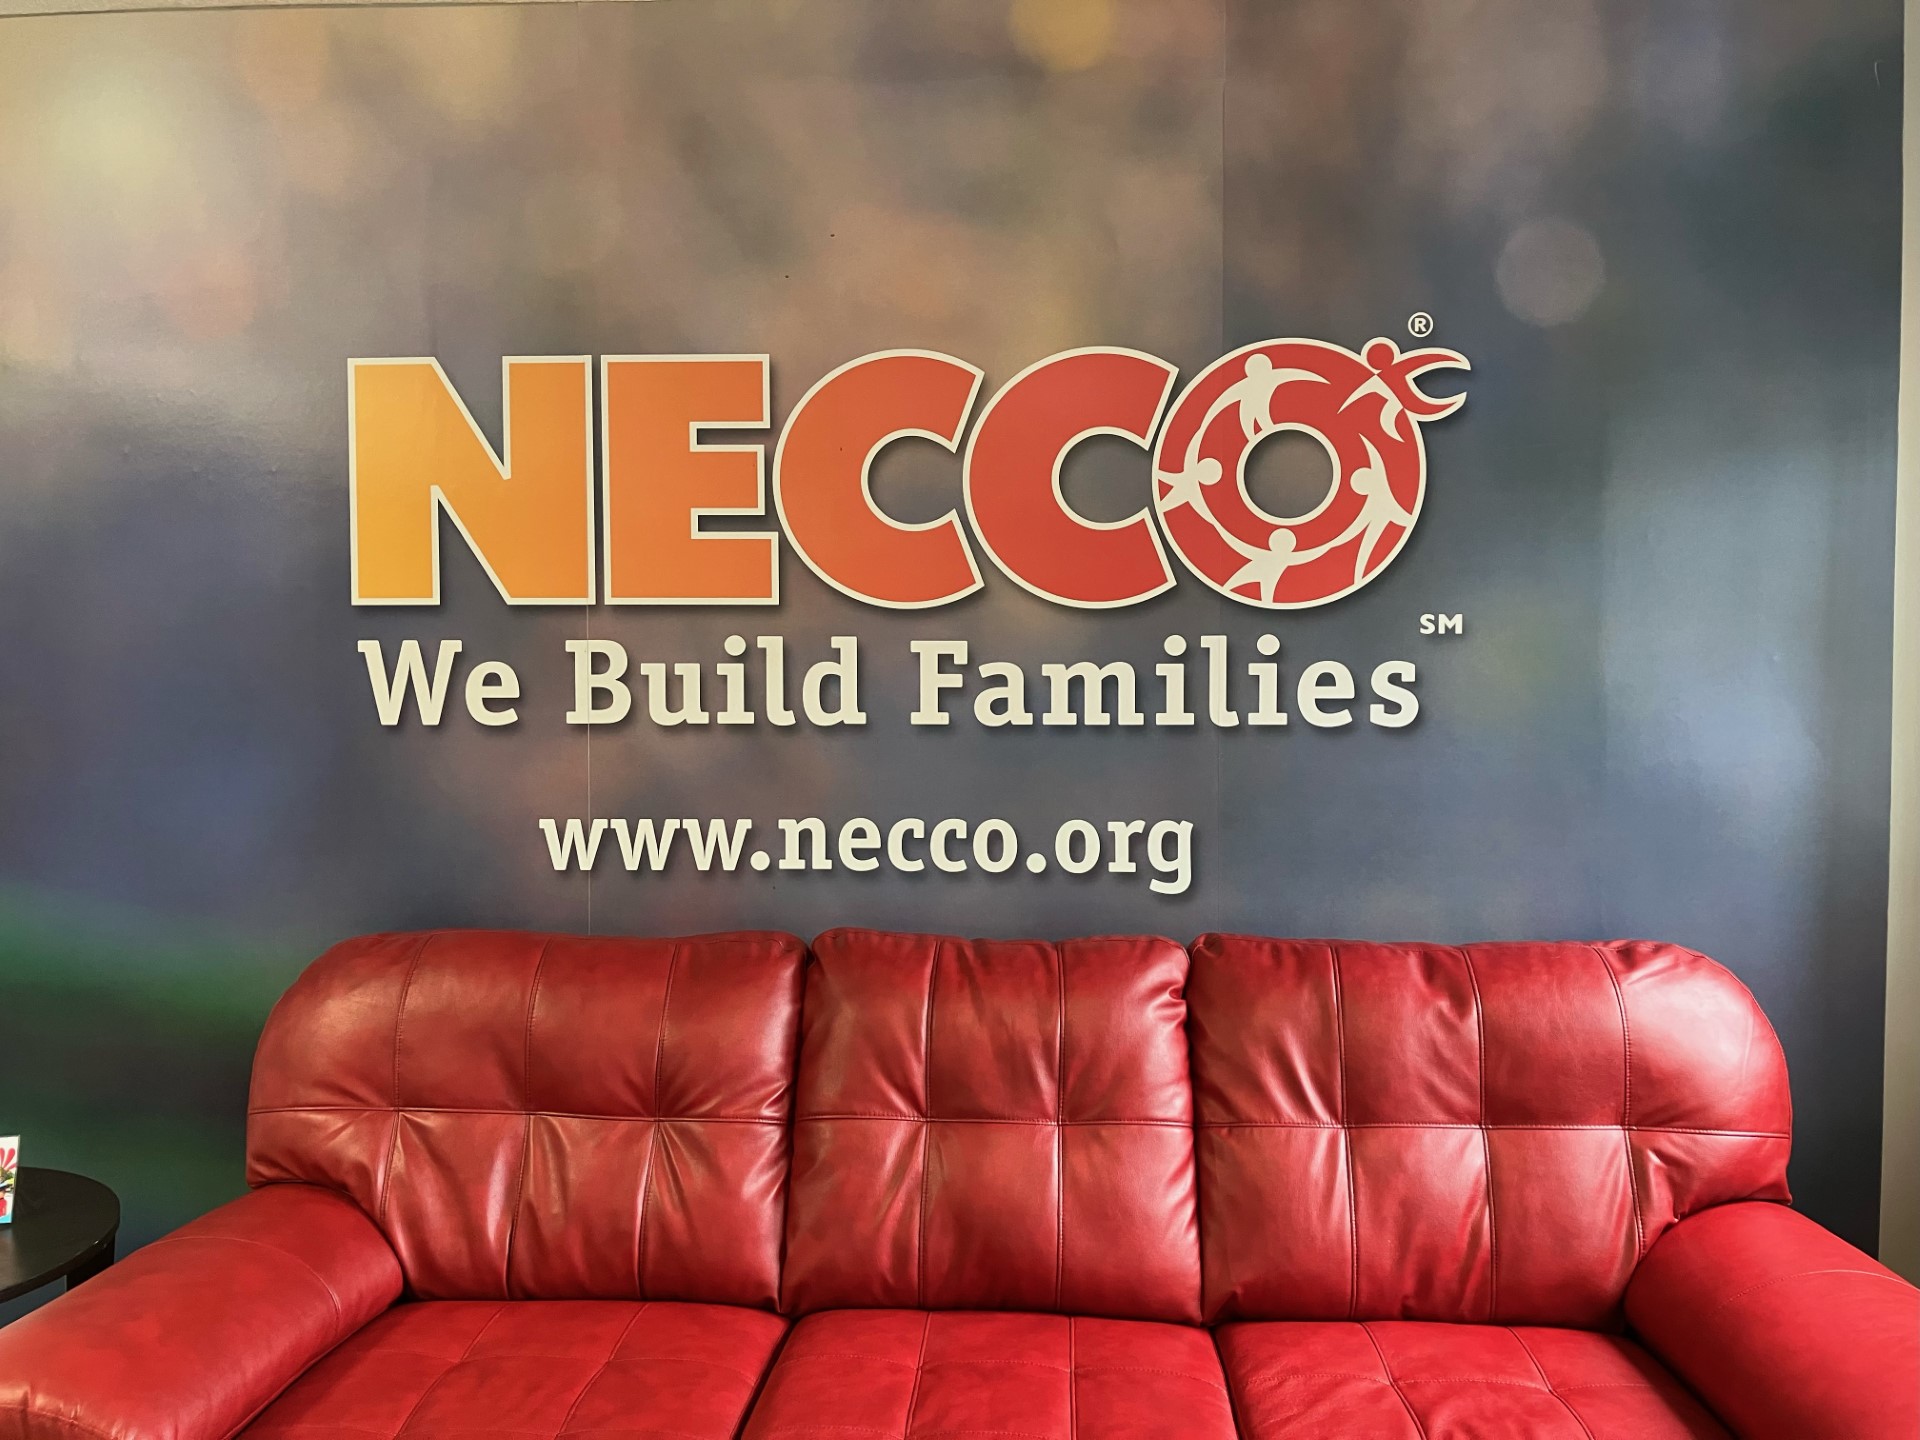 Front lobby at the Necco Florence office.